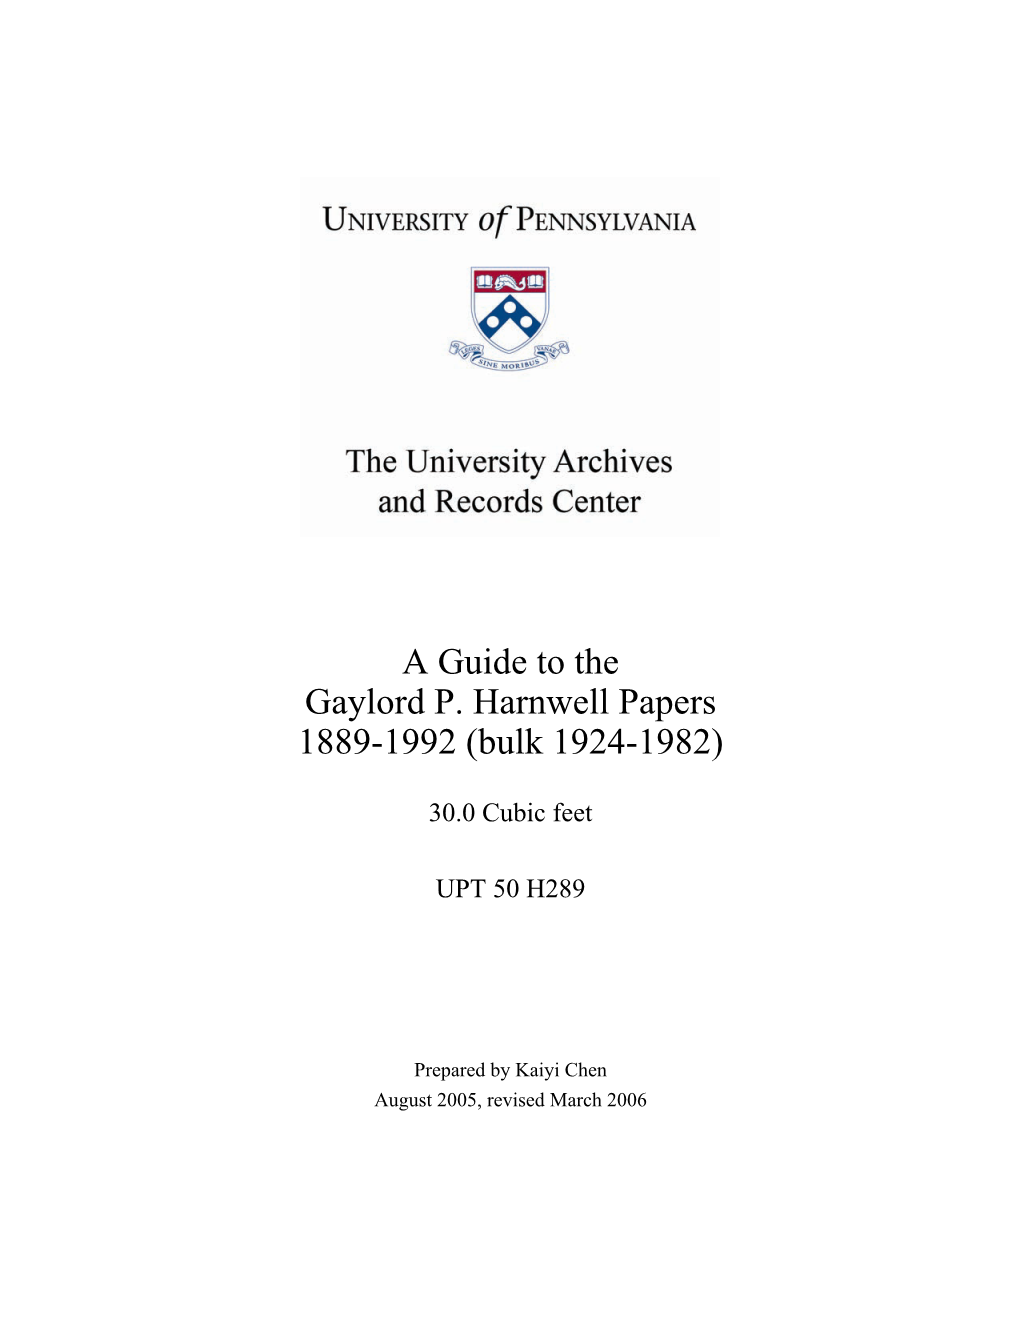 Guide, Gaylord P. Harnwell Papers (UPT 50 H289)